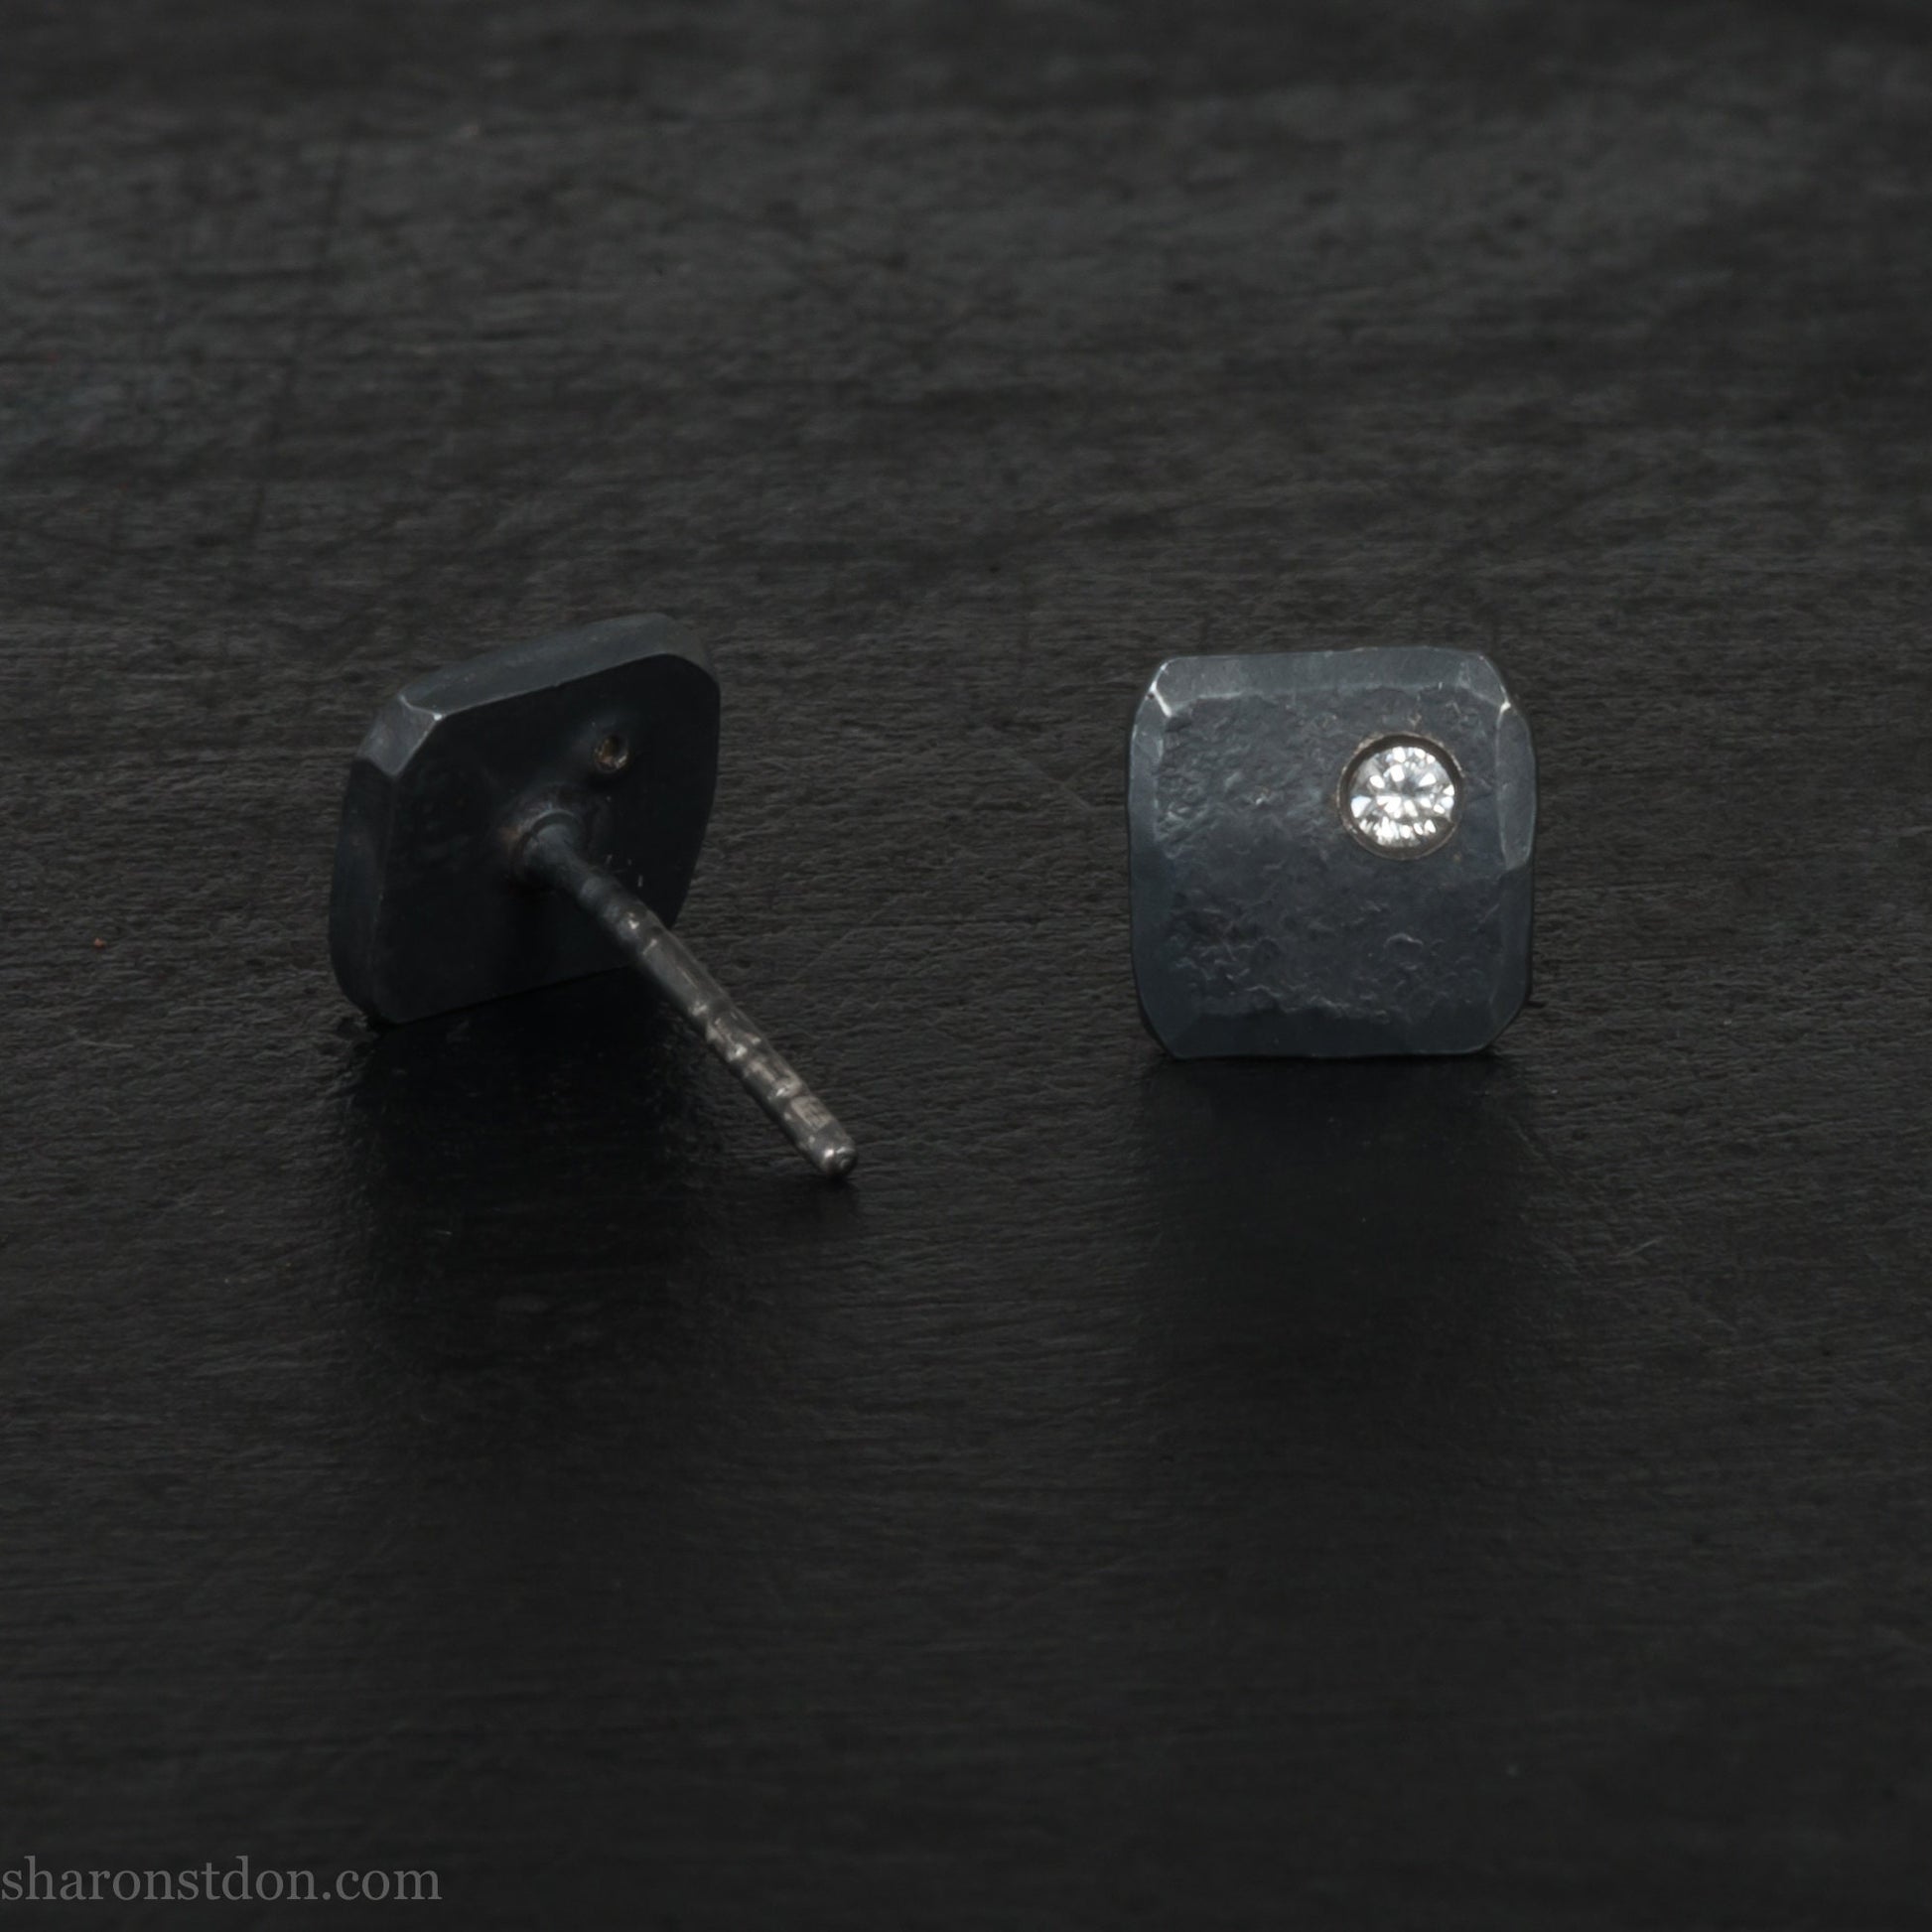 Canadian diamond 7mm square studs | Oxidized black 925 sterling silver stud earrings for men or women, non binary | Handmade, unique design